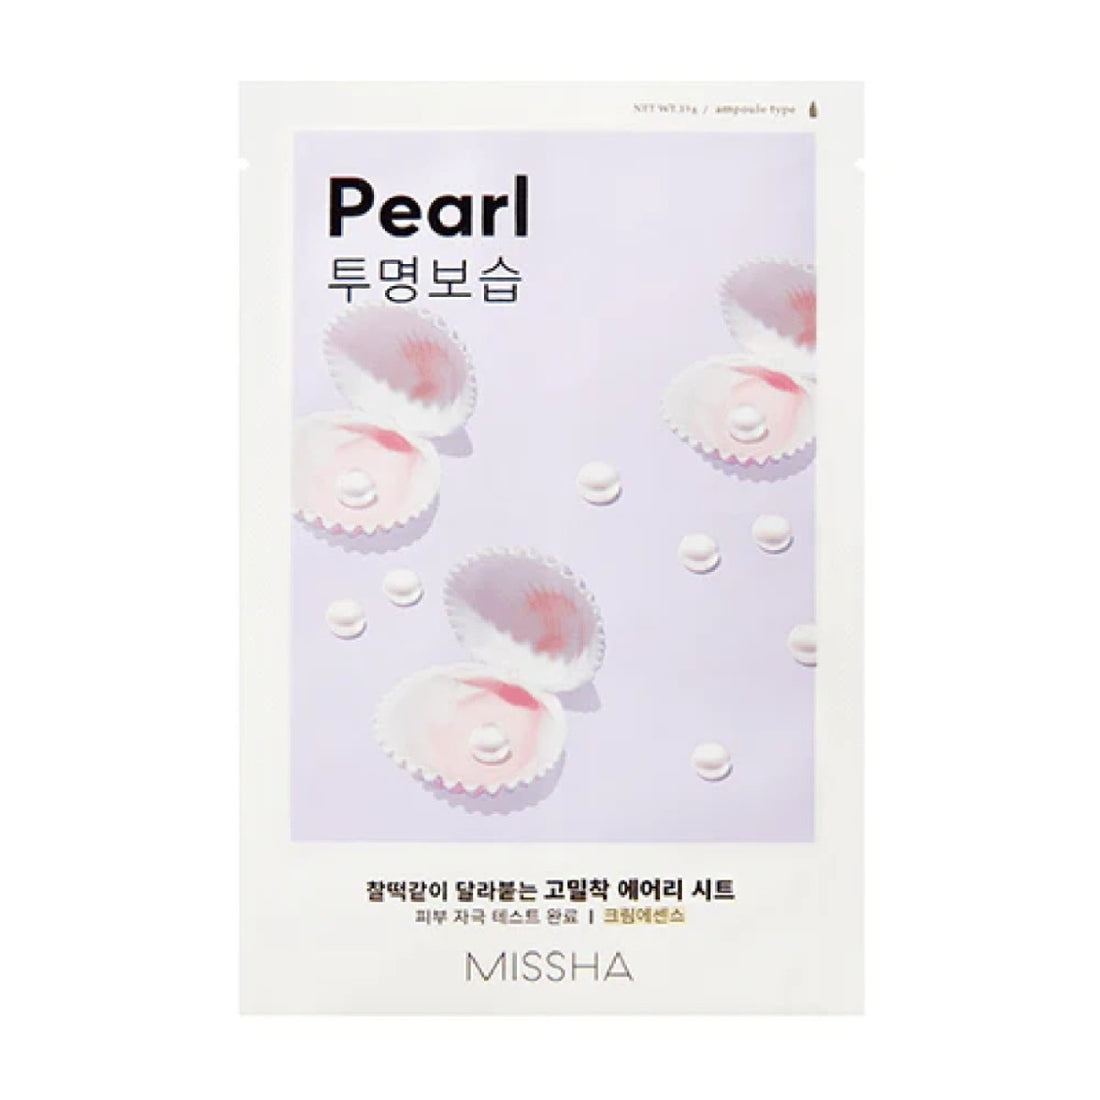 MISSHA Airy Fit Sheet Mask (Pearl) (0.19g)